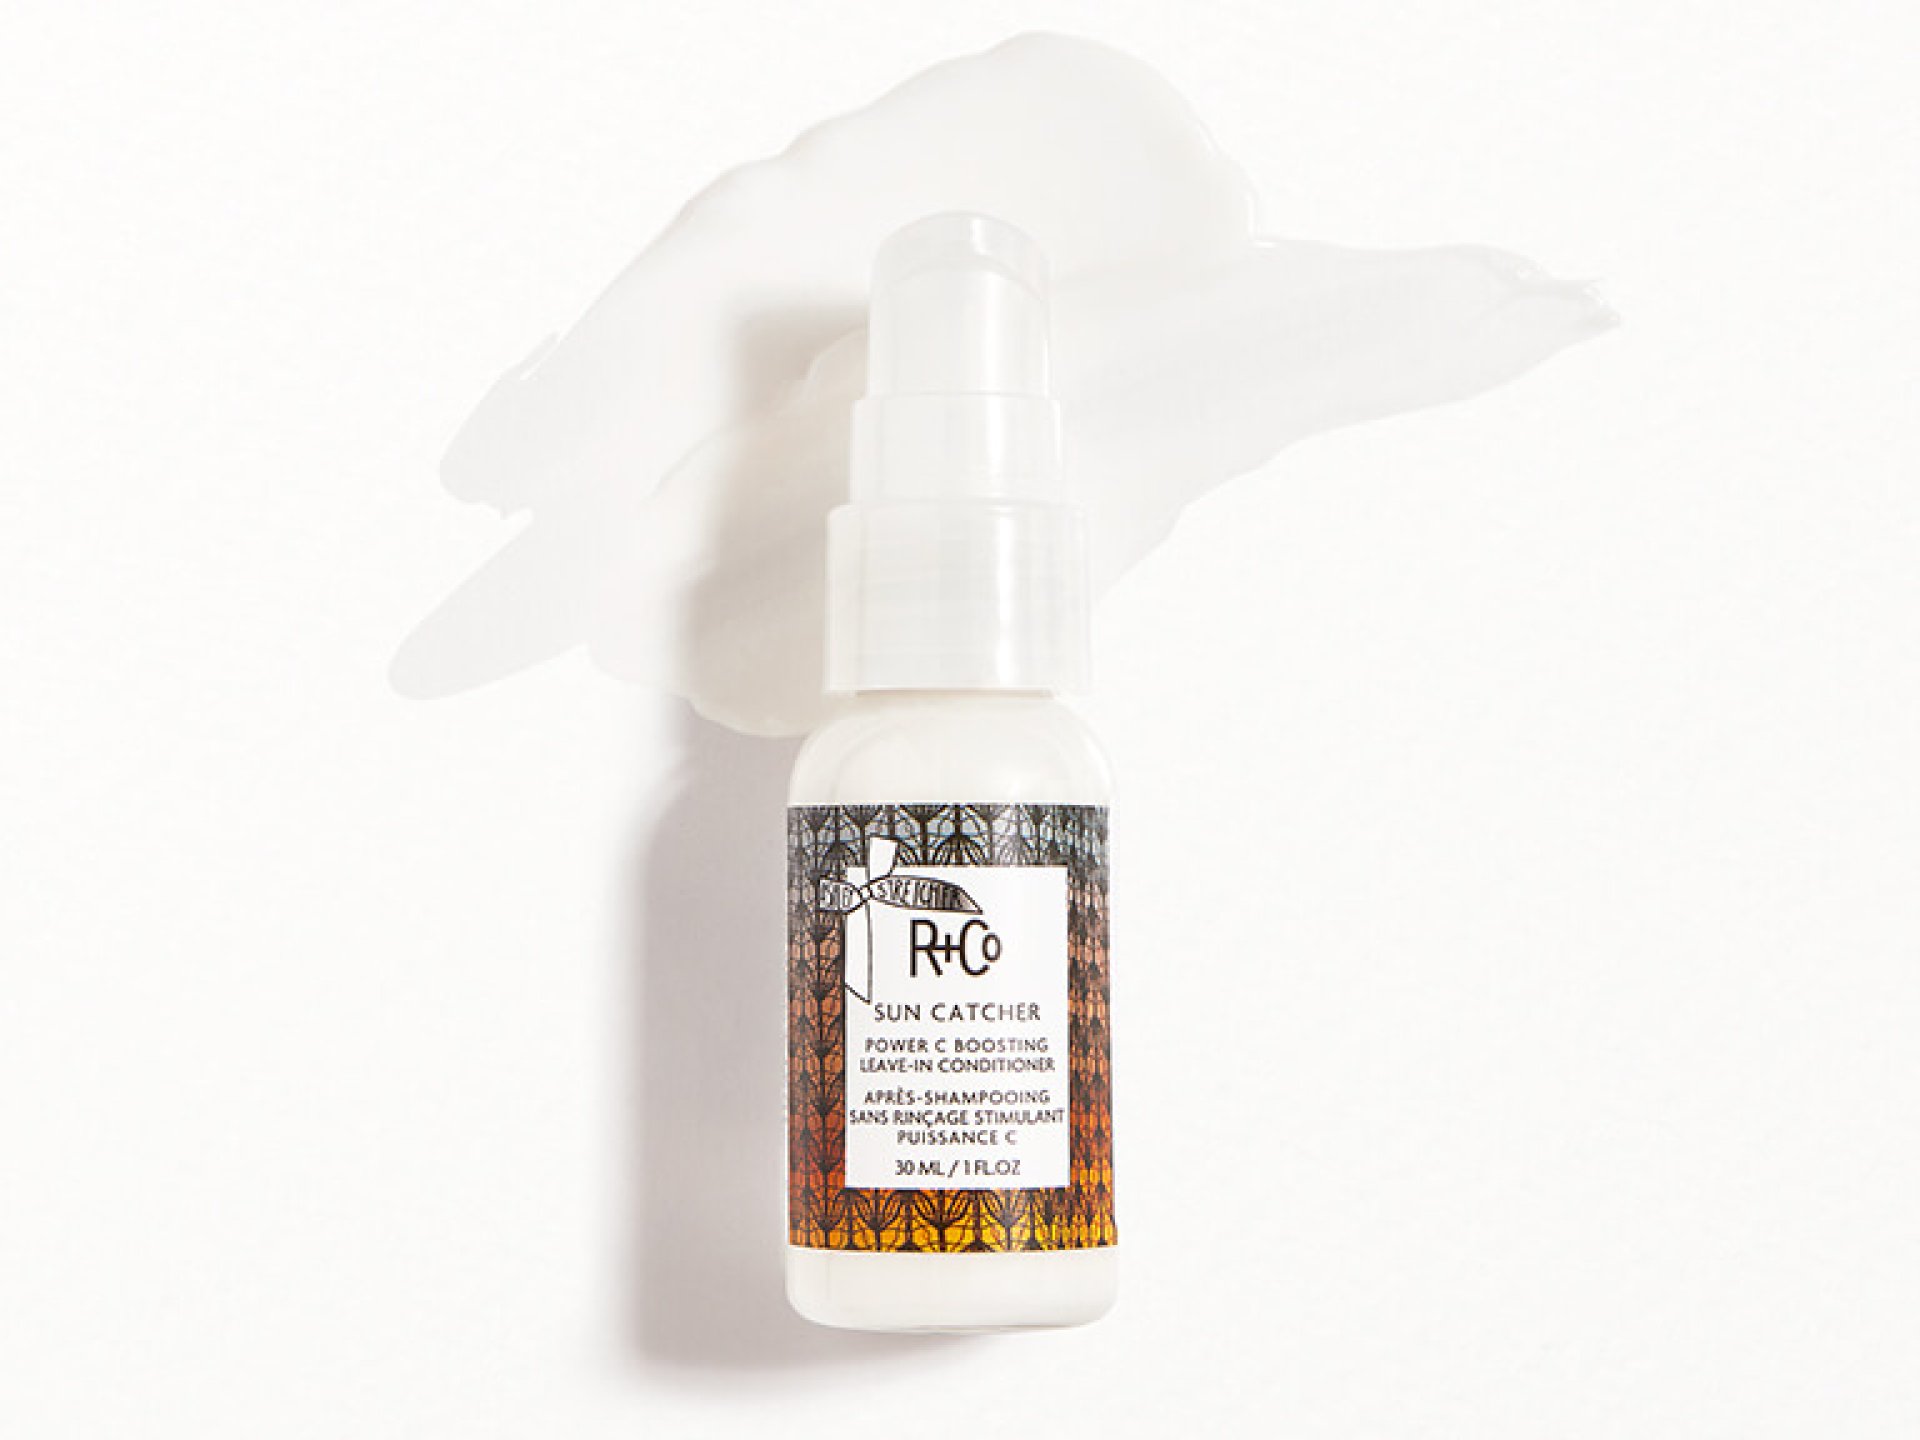 R+CO SUN CATCHER POWER C BOOSTING LEAVE-IN CONDITIONER